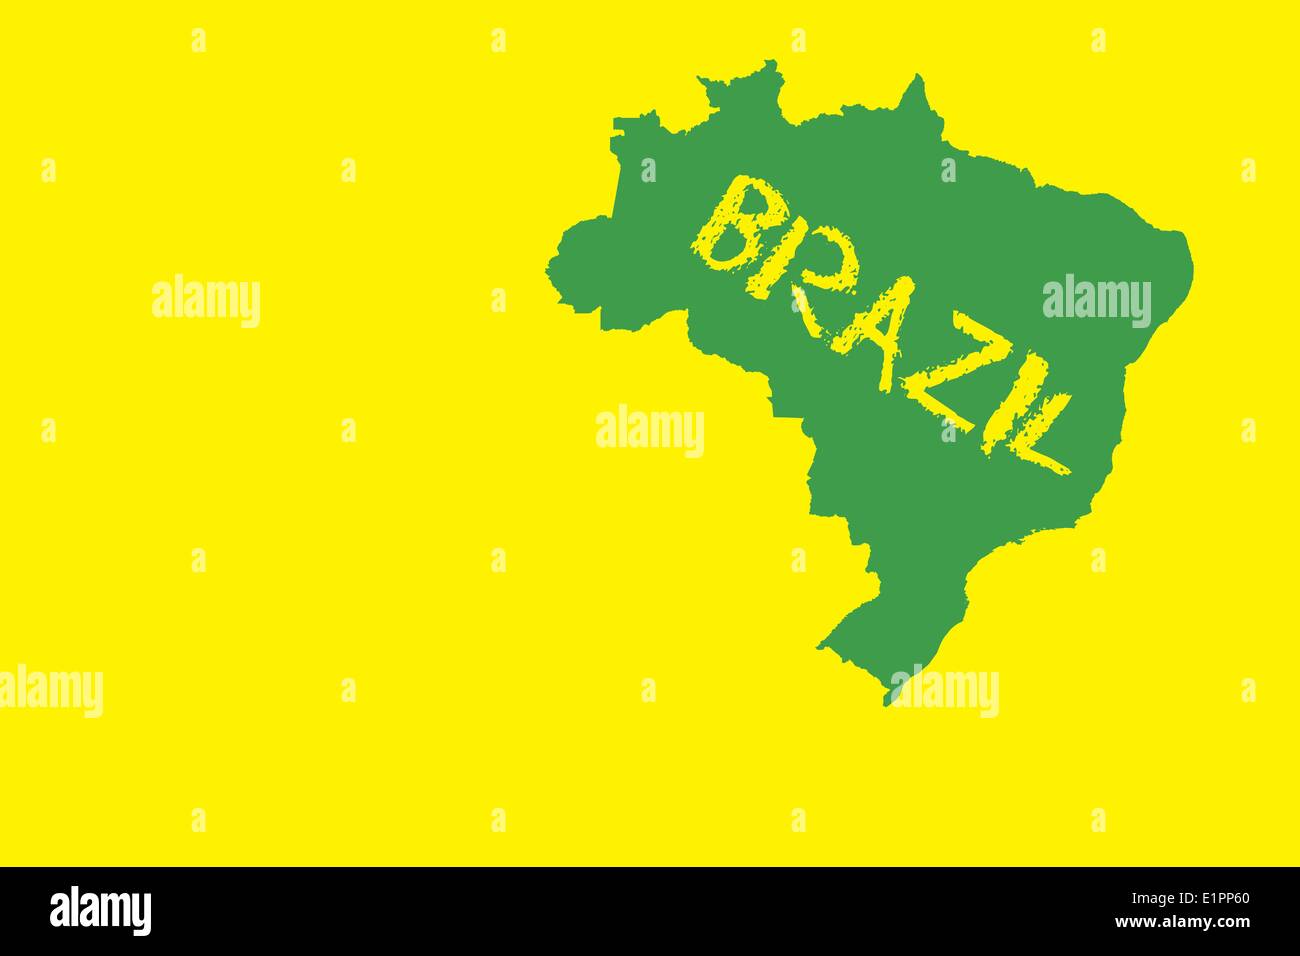 Green brazil outline on yellow with text Stock Photo